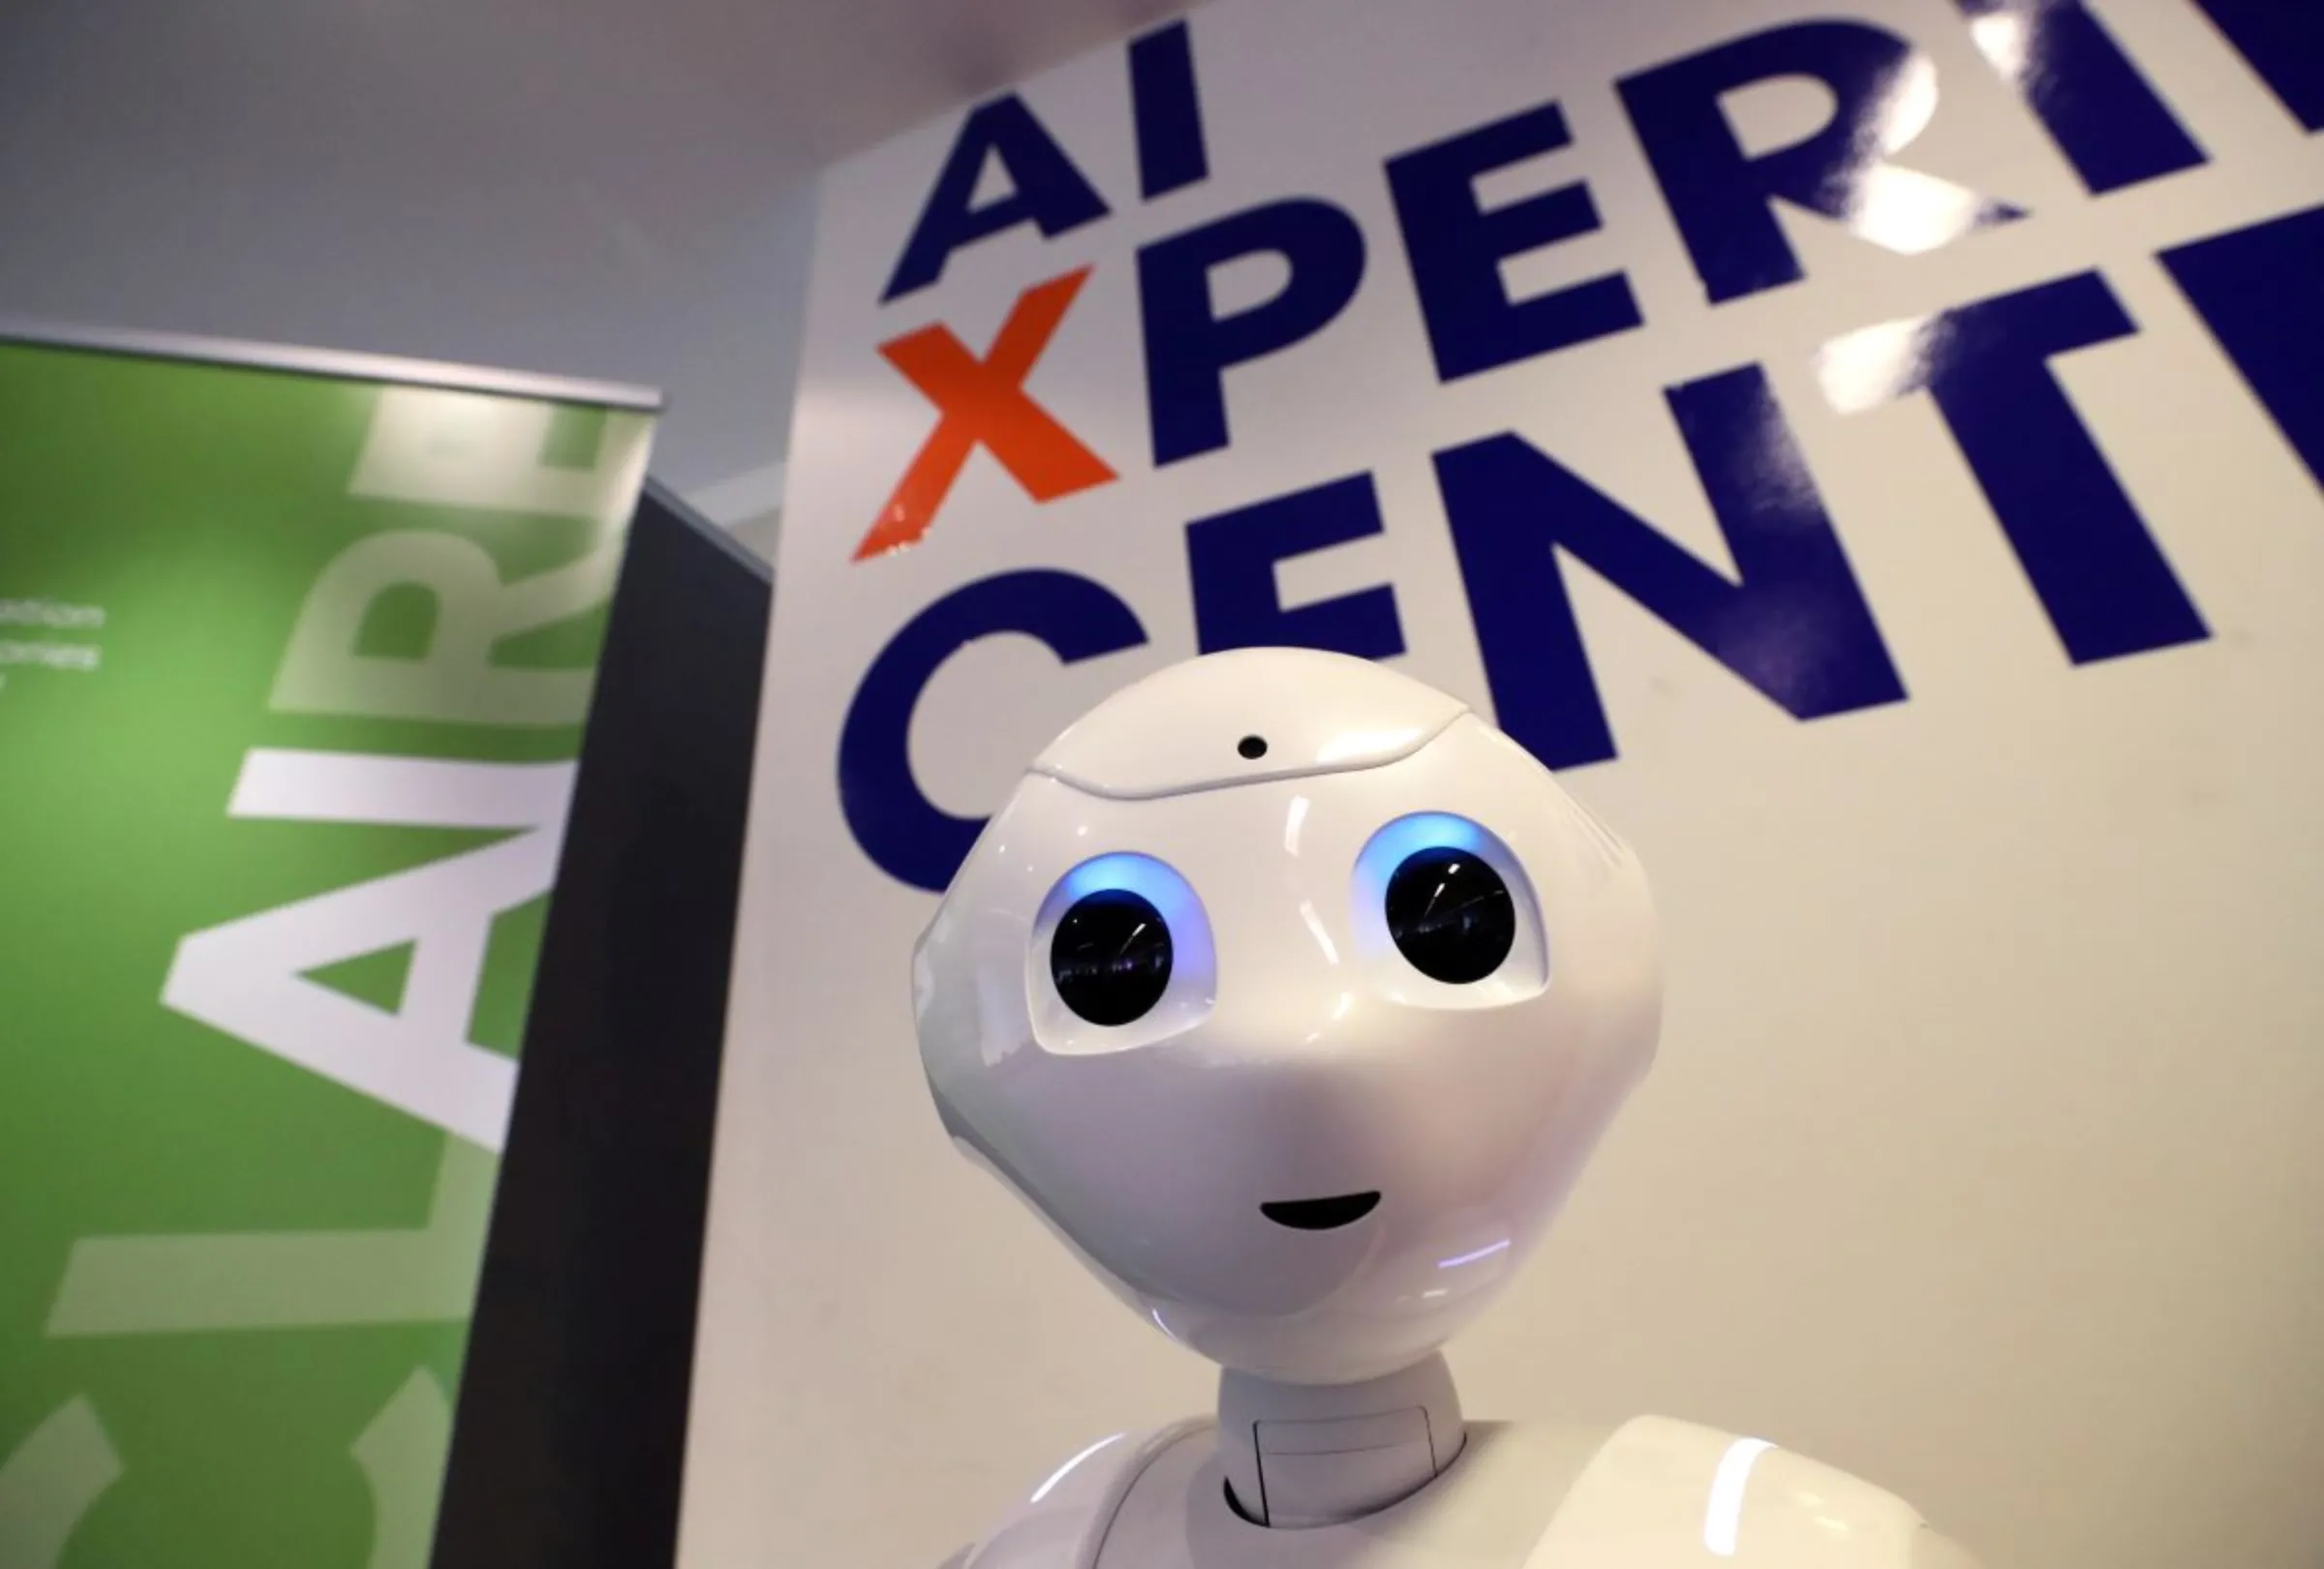 A robot equipped with artificial intelligence is seen at the AI Xperience Center at the VUB (Vrije Universiteit Brussel) in Brussels, Belgium February 19, 2020. REUTERS/Yves Herman